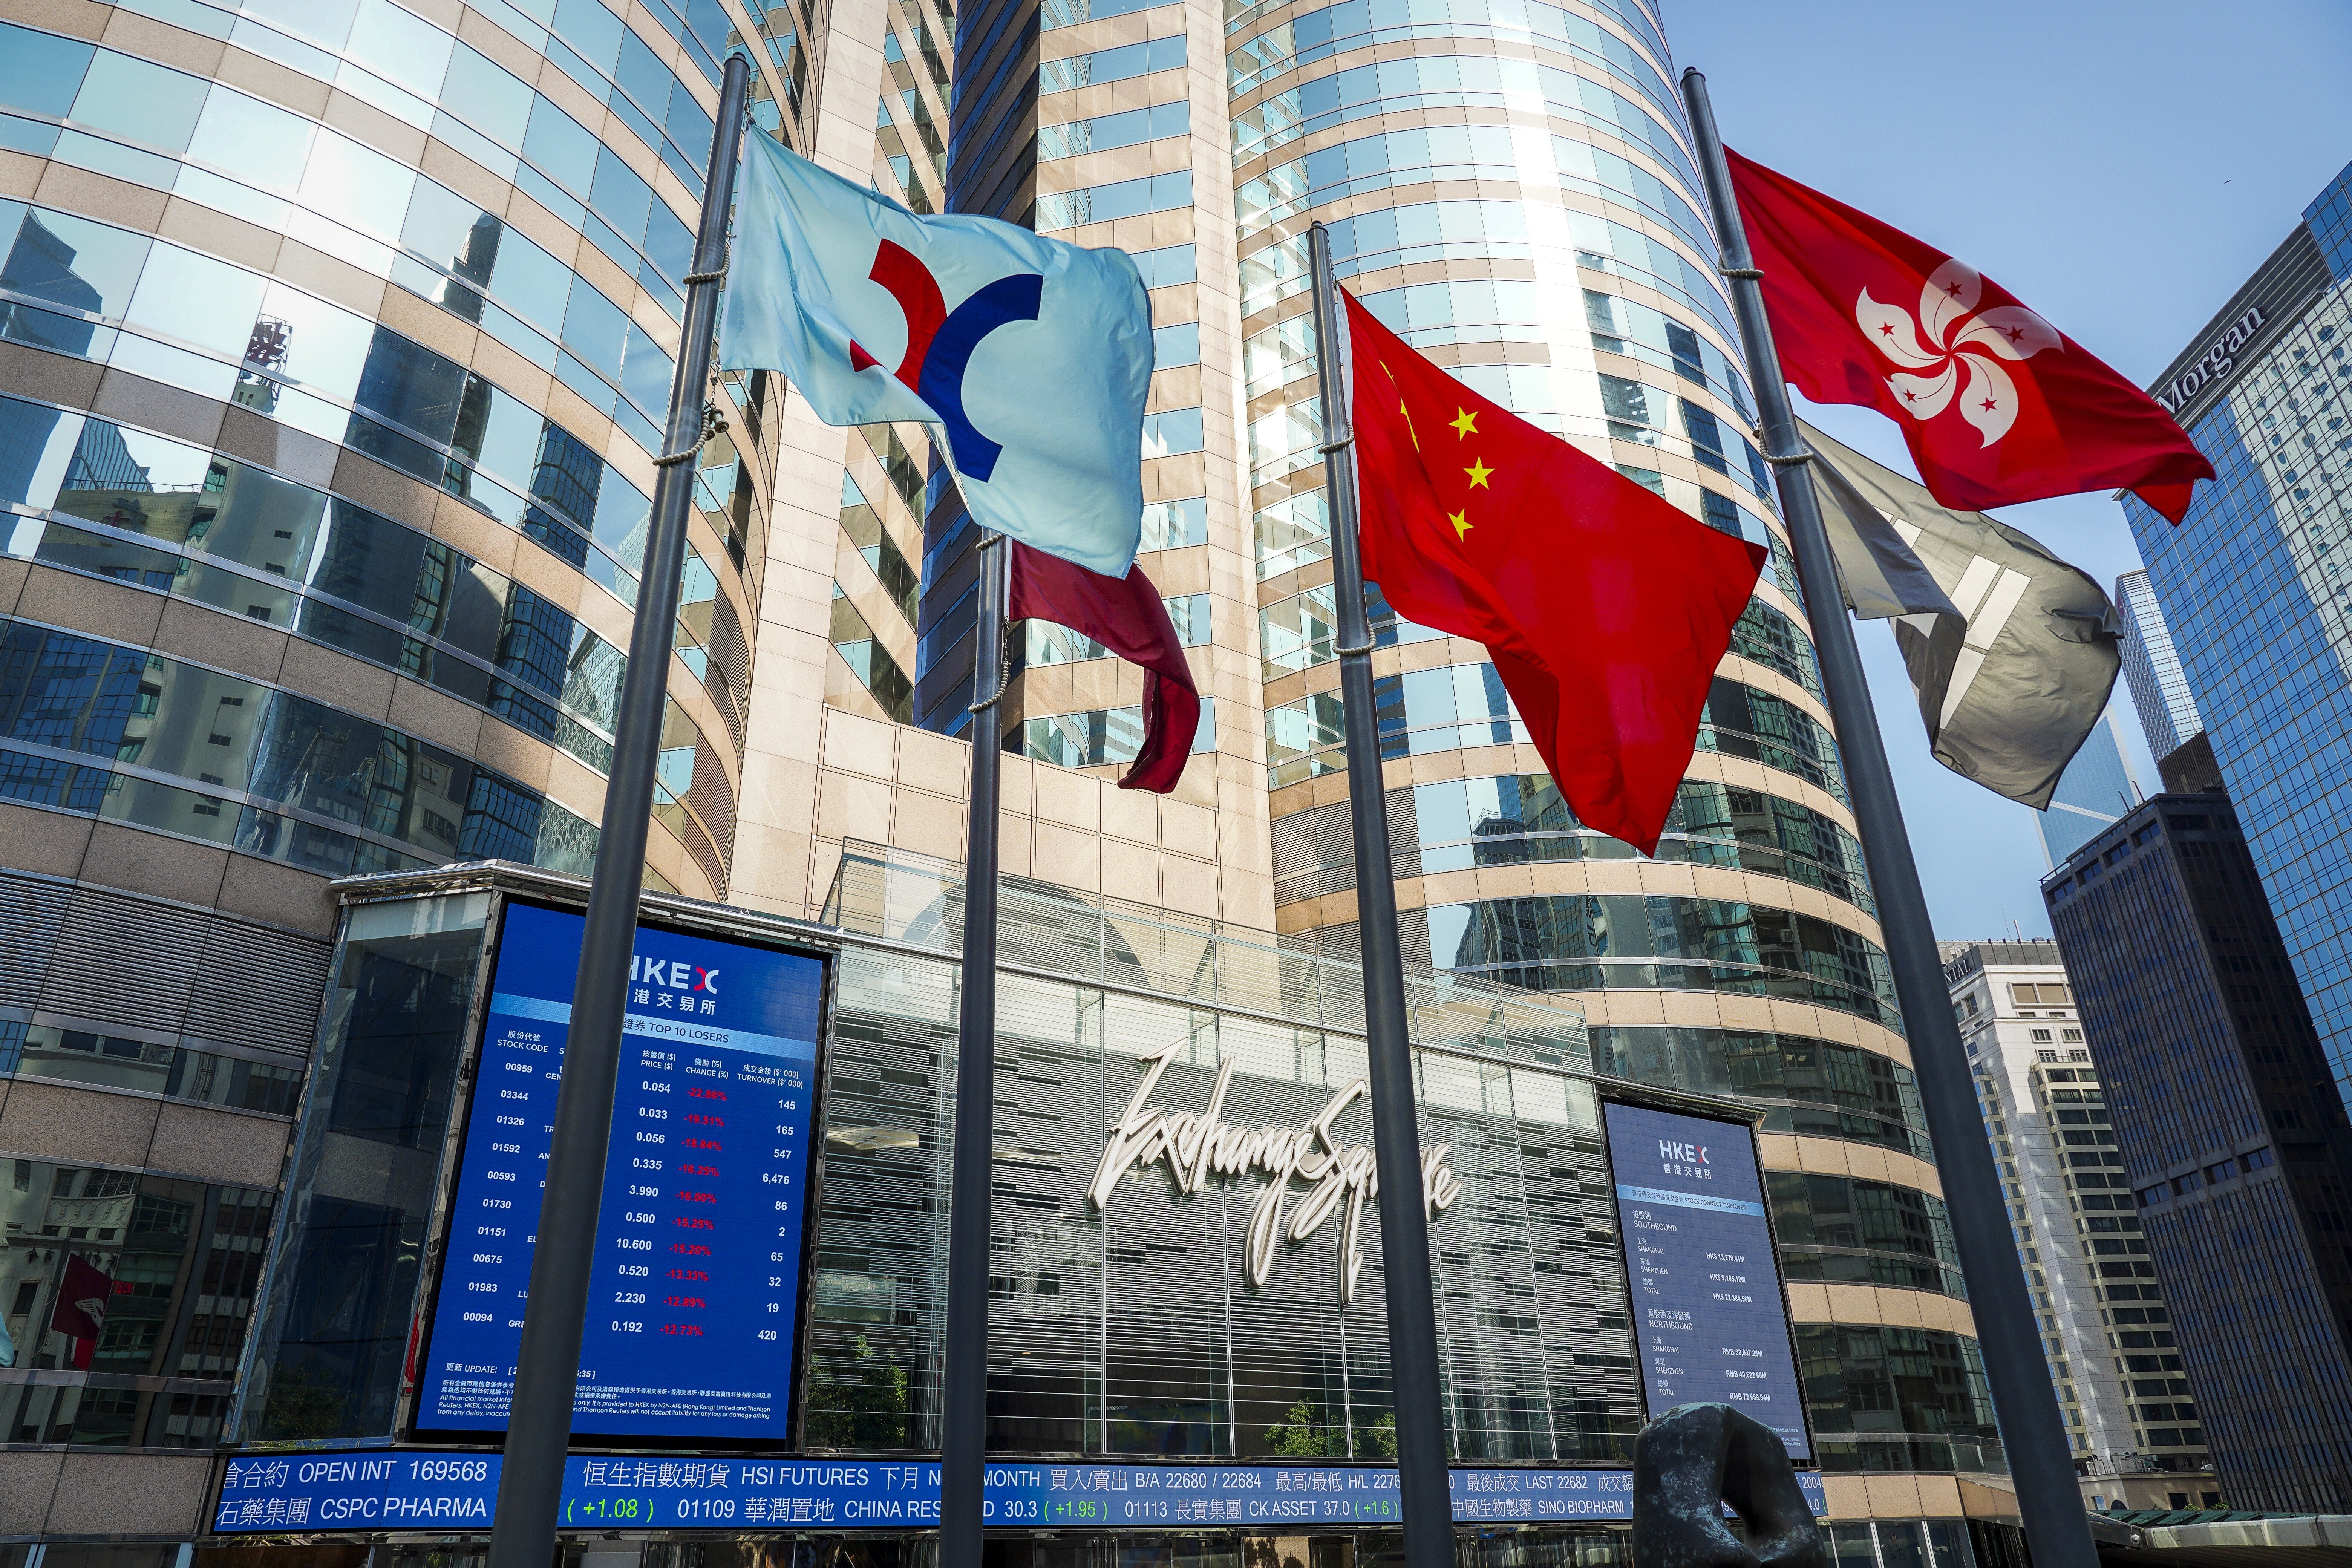 Flags are raised outside the Hong Kong Exchange Square building in Central, following the coronavirus outbreak on March 24. Photo: Robert Ng